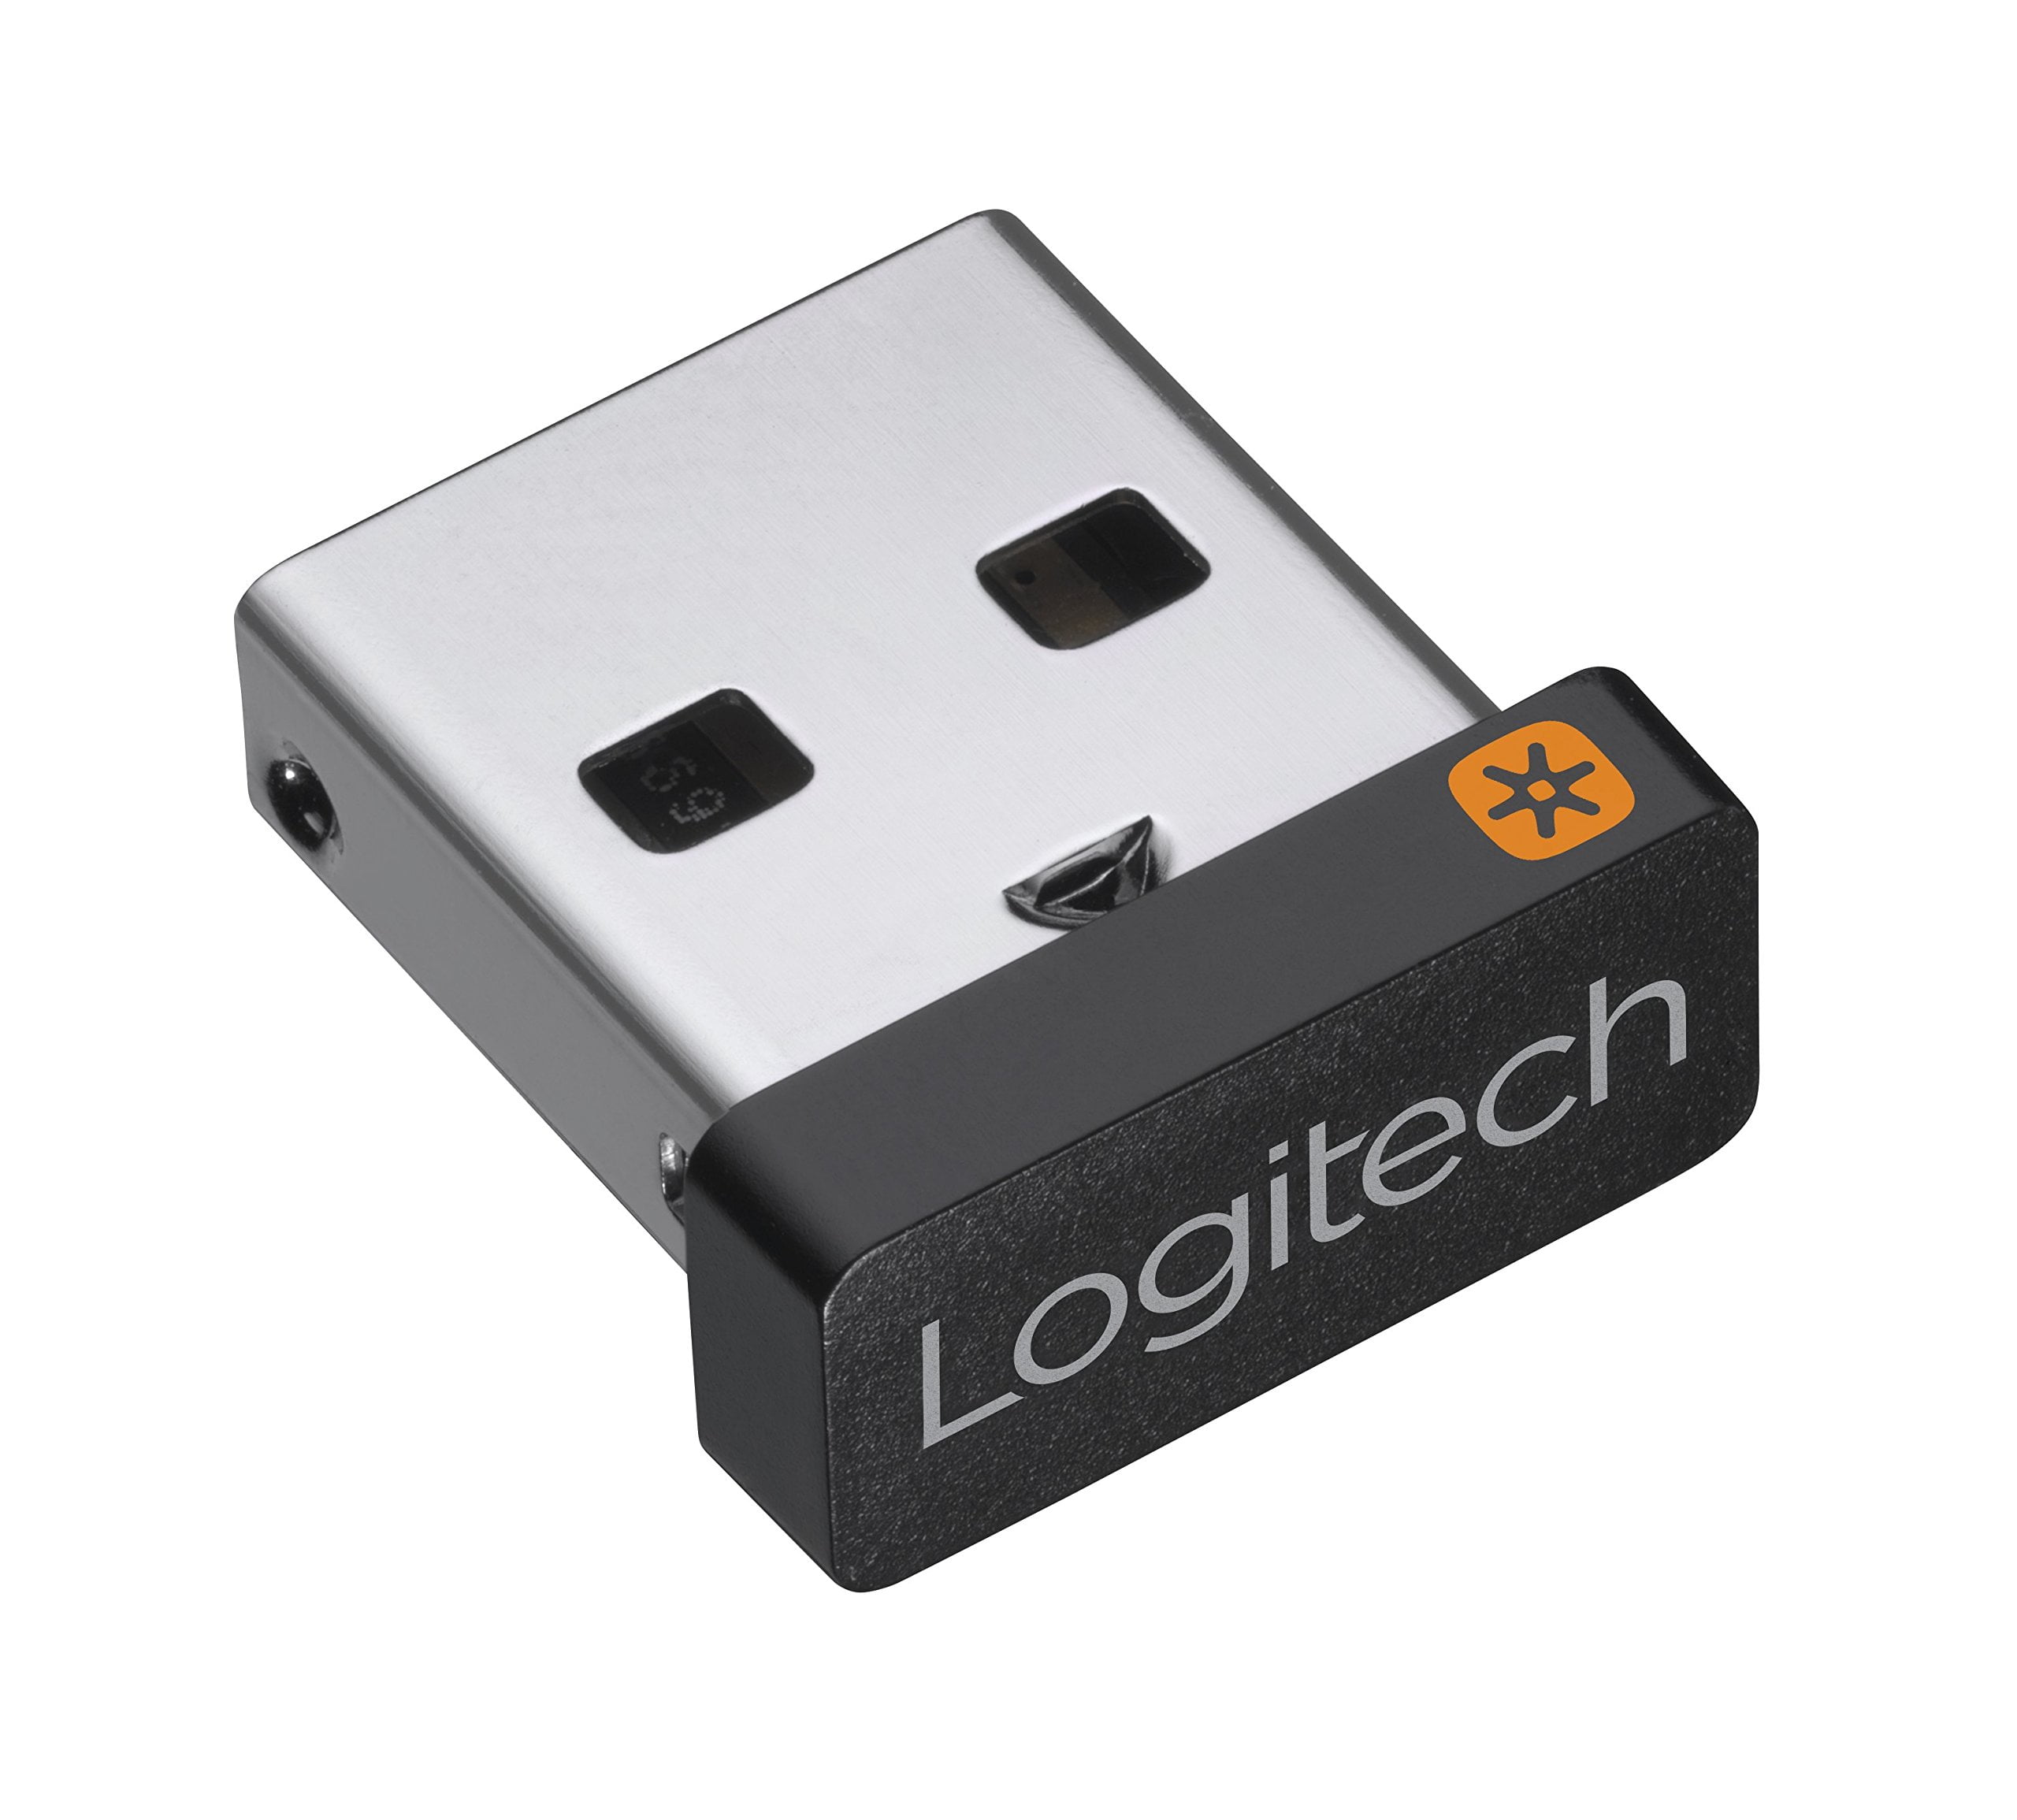 Replacement Unifying Receiver for Logitech Wireless Keyboard K270 HS 